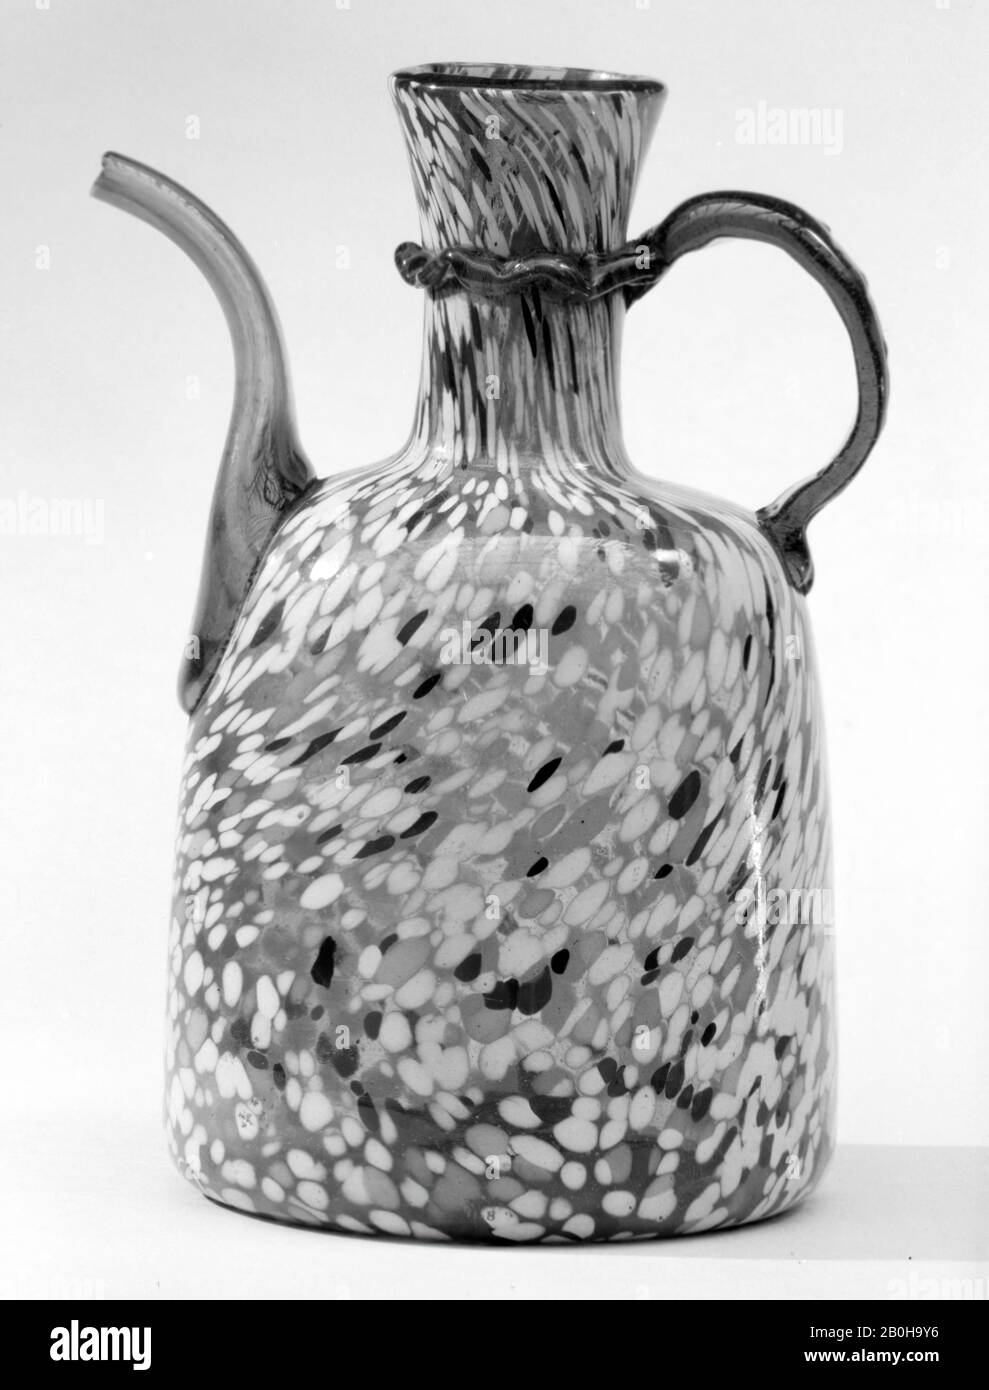 Ewer, French, Nevers, early 17th century, French, Nevers, Glass, Height: 10 in. (25.4 cm), Glass Stock Photo